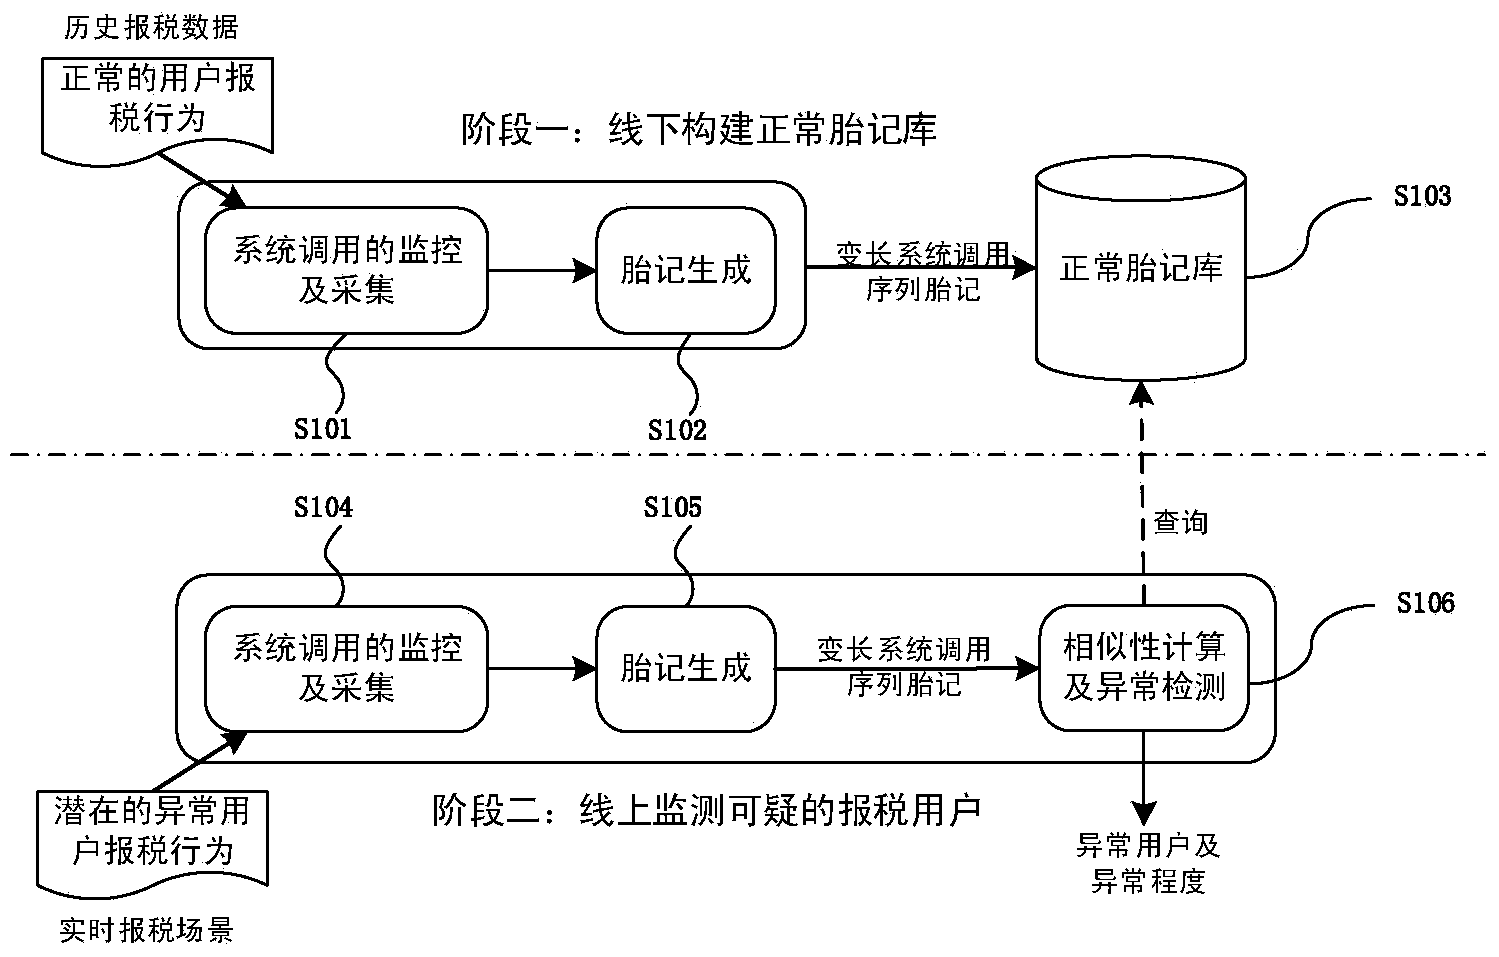 Online taxpayer identity recognition method based on variable-length system calling sequence birthmarks